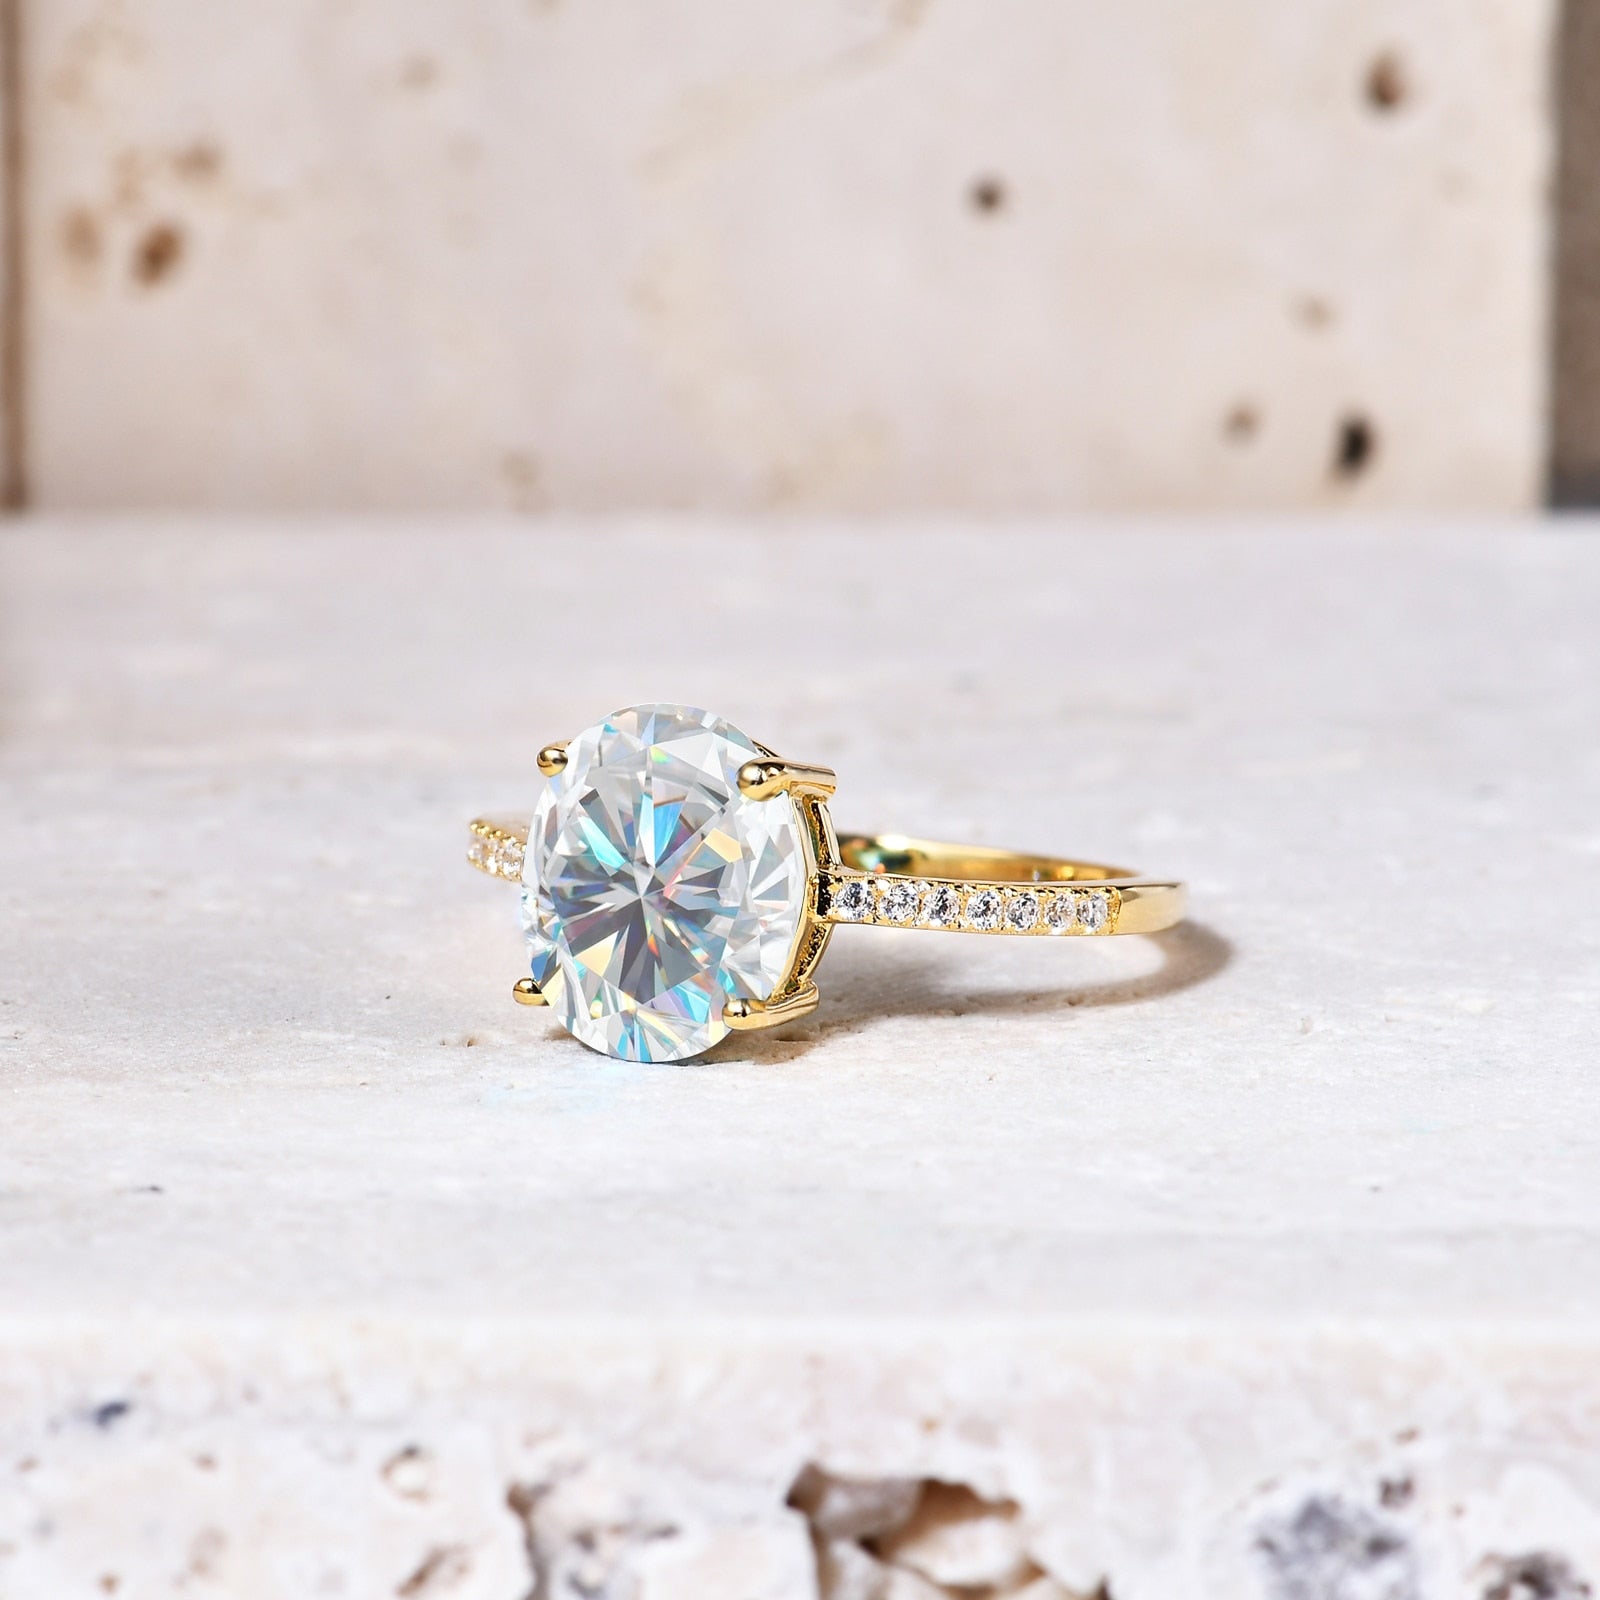 A gold pave band with moon and star cut outs on each side, set with a 3CT oval moissanite.